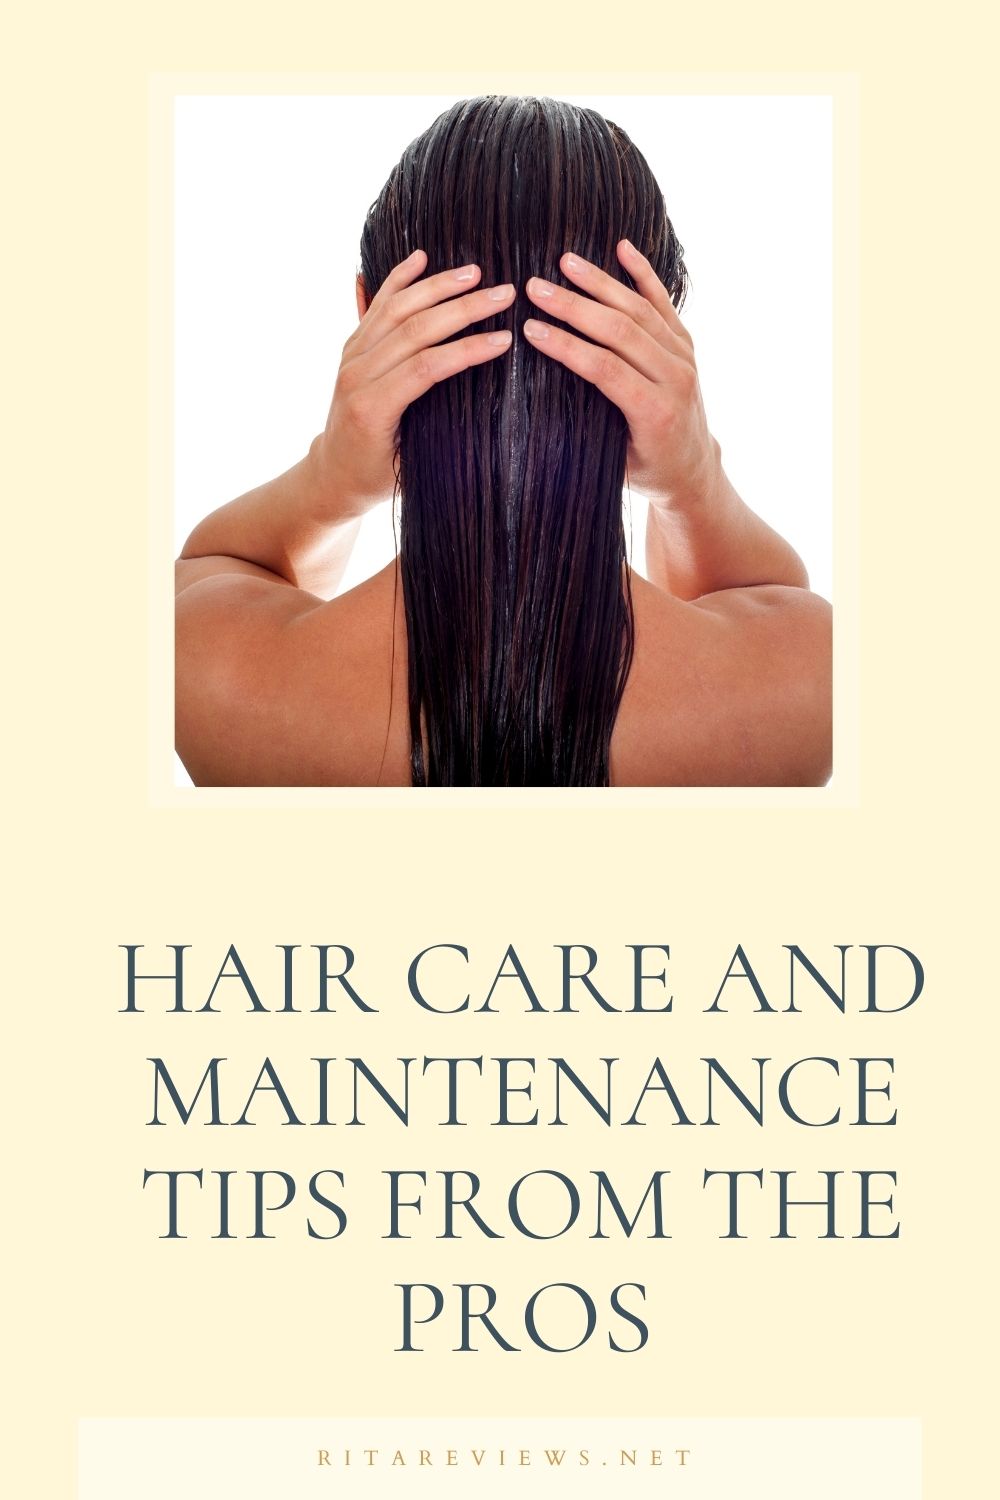 Hair Care and Maintenance Tips From the Pros